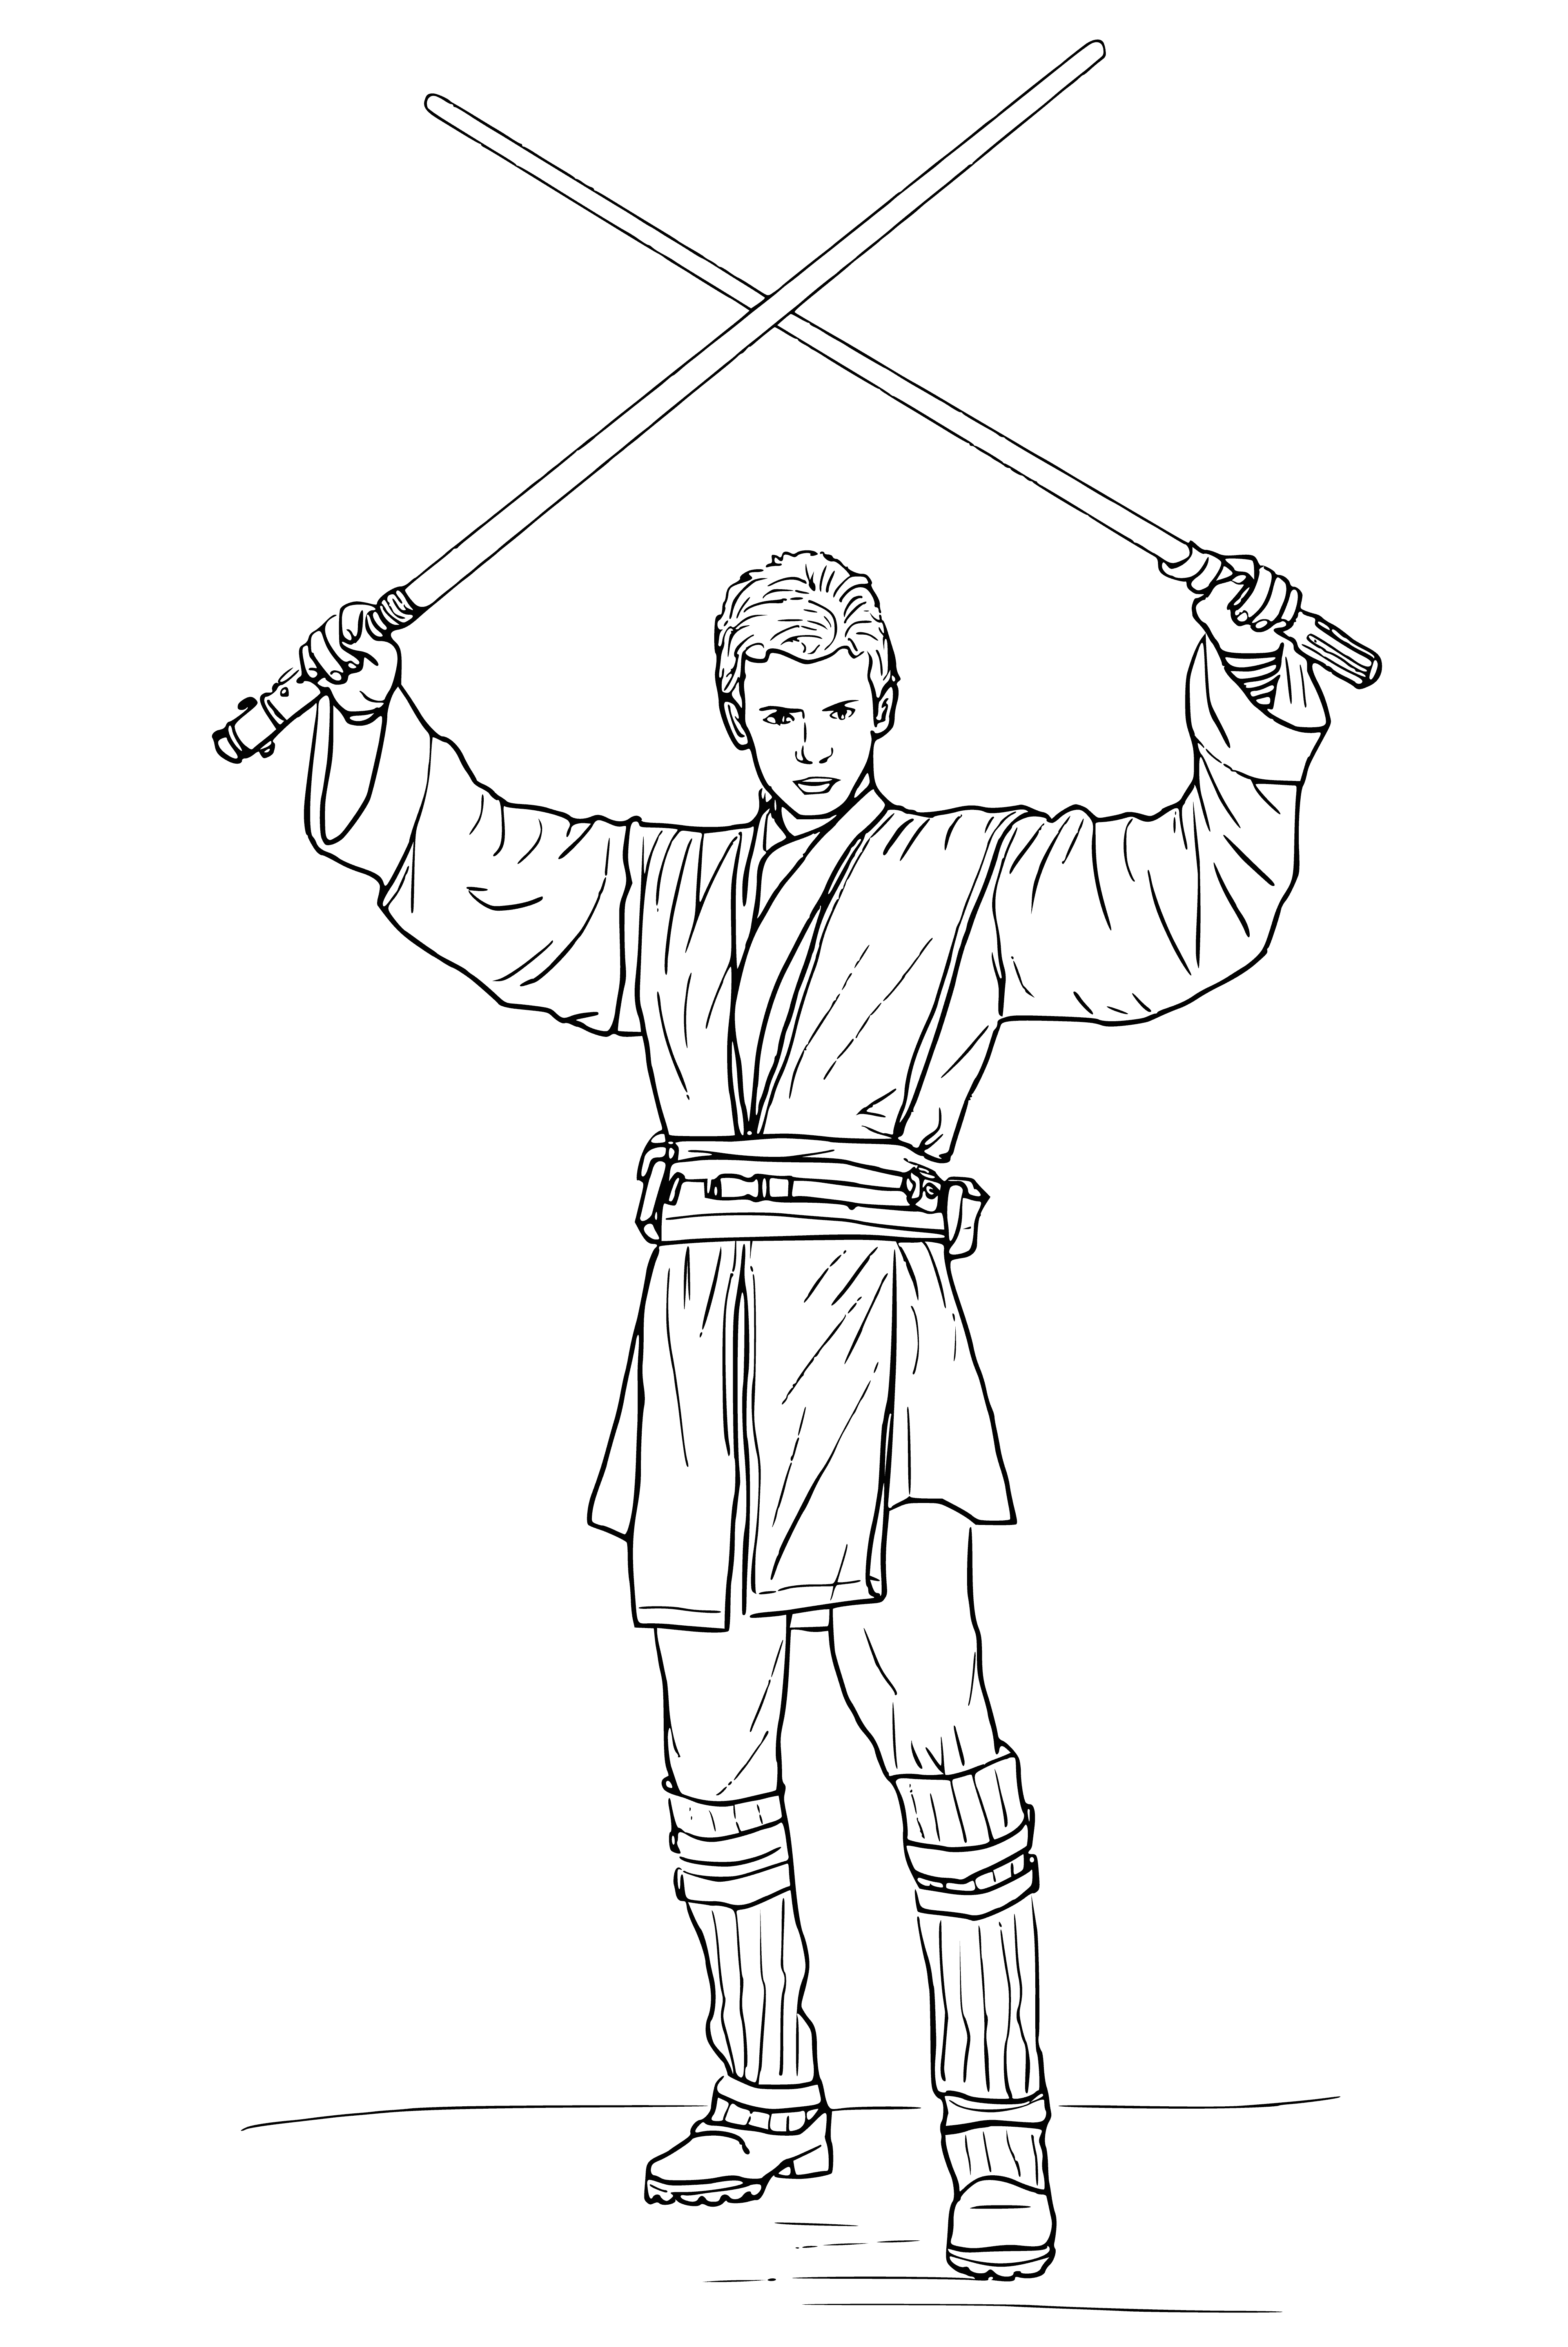 coloring page: Ewan McGregor's Enakin Skywalker is a Jedi Knight who protects Senator Padme and uses his skills and a lightsaber to defeat attackers and escort Padme to safety. #Starwars